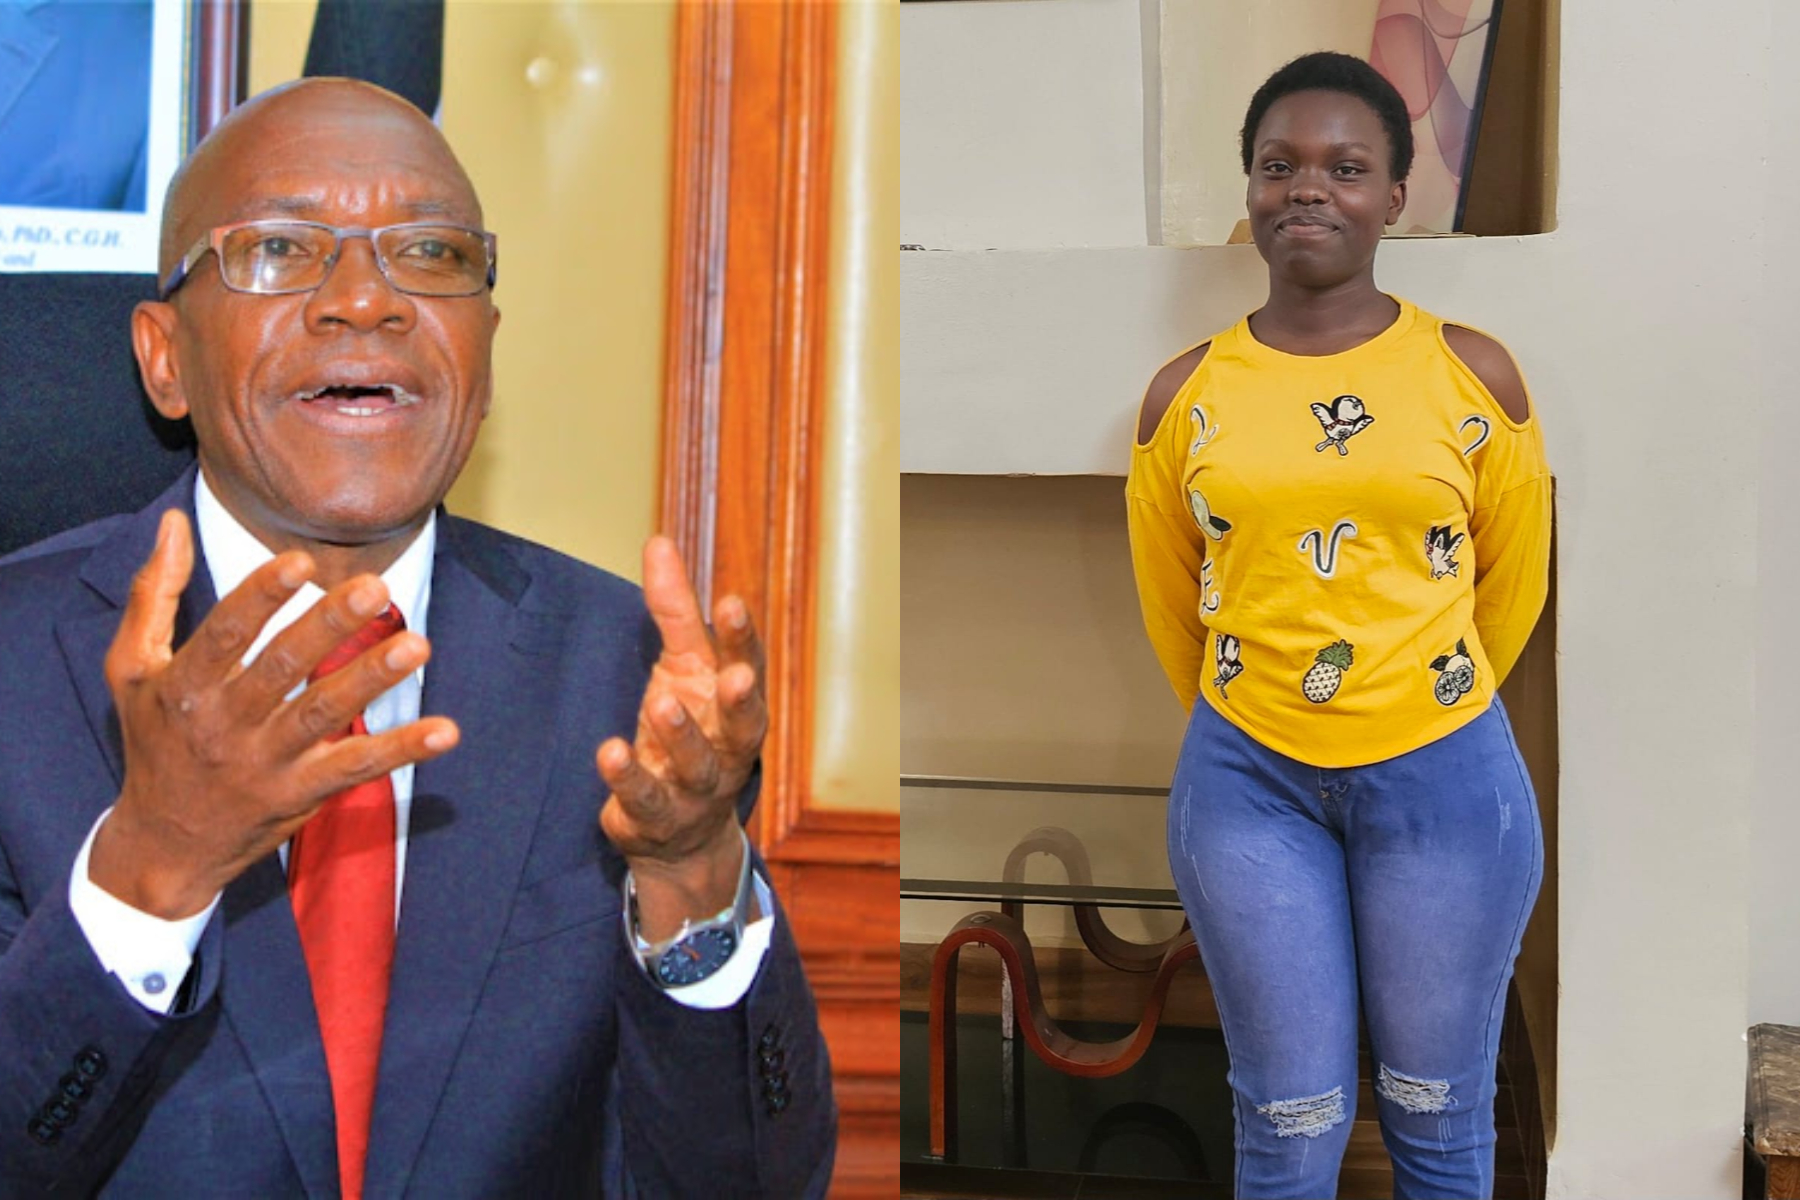 Photocollage of Boni Khalwale and his daughter Gift.